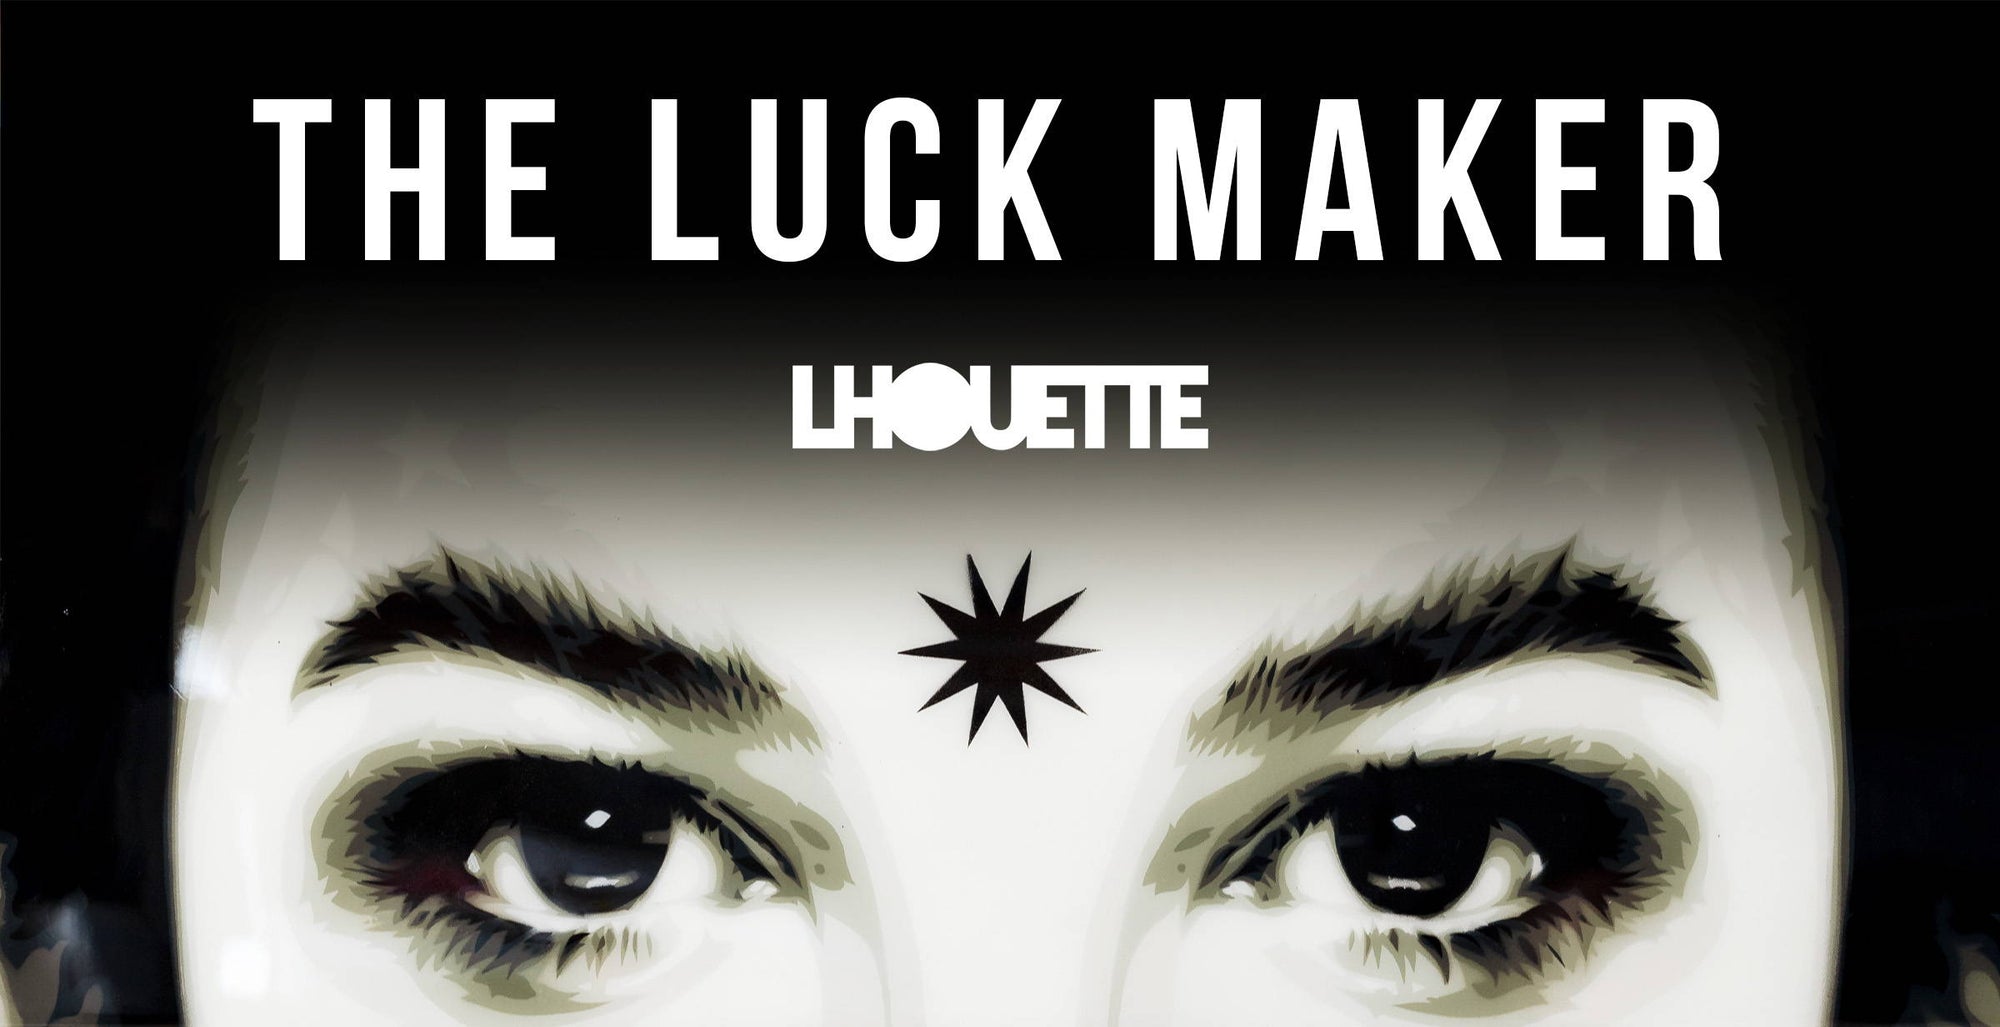 'The Luck Maker' by Lhouette